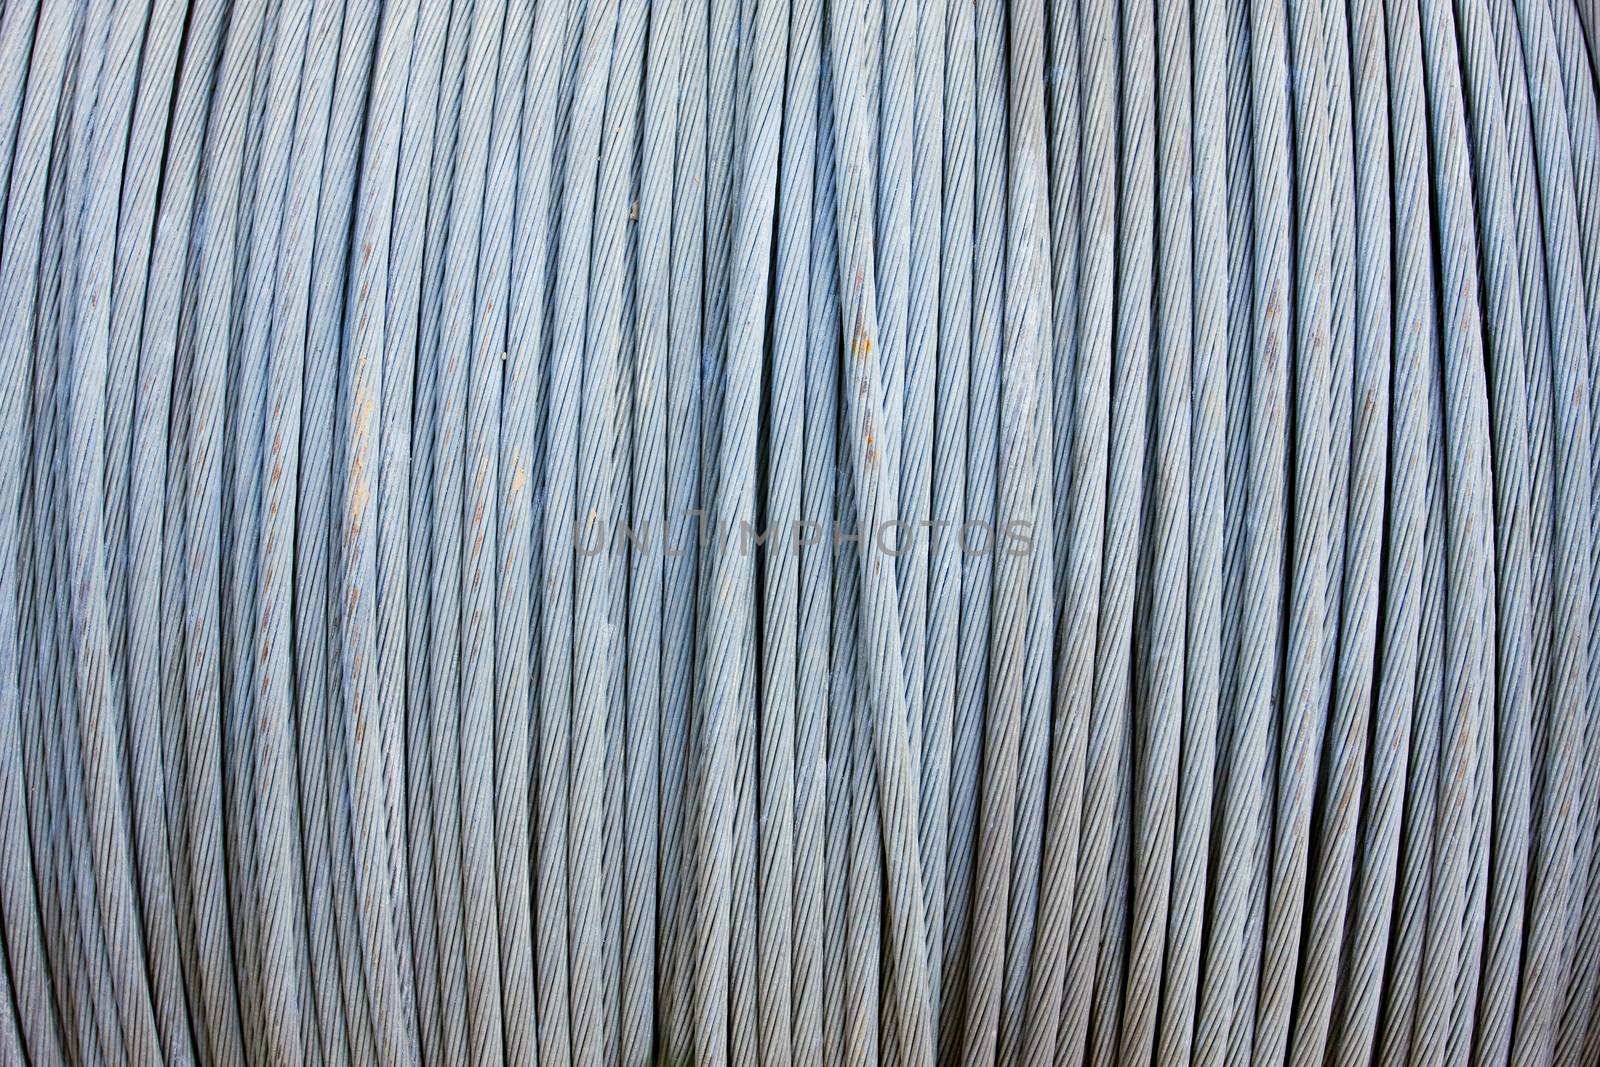 Steel wire cable background texture